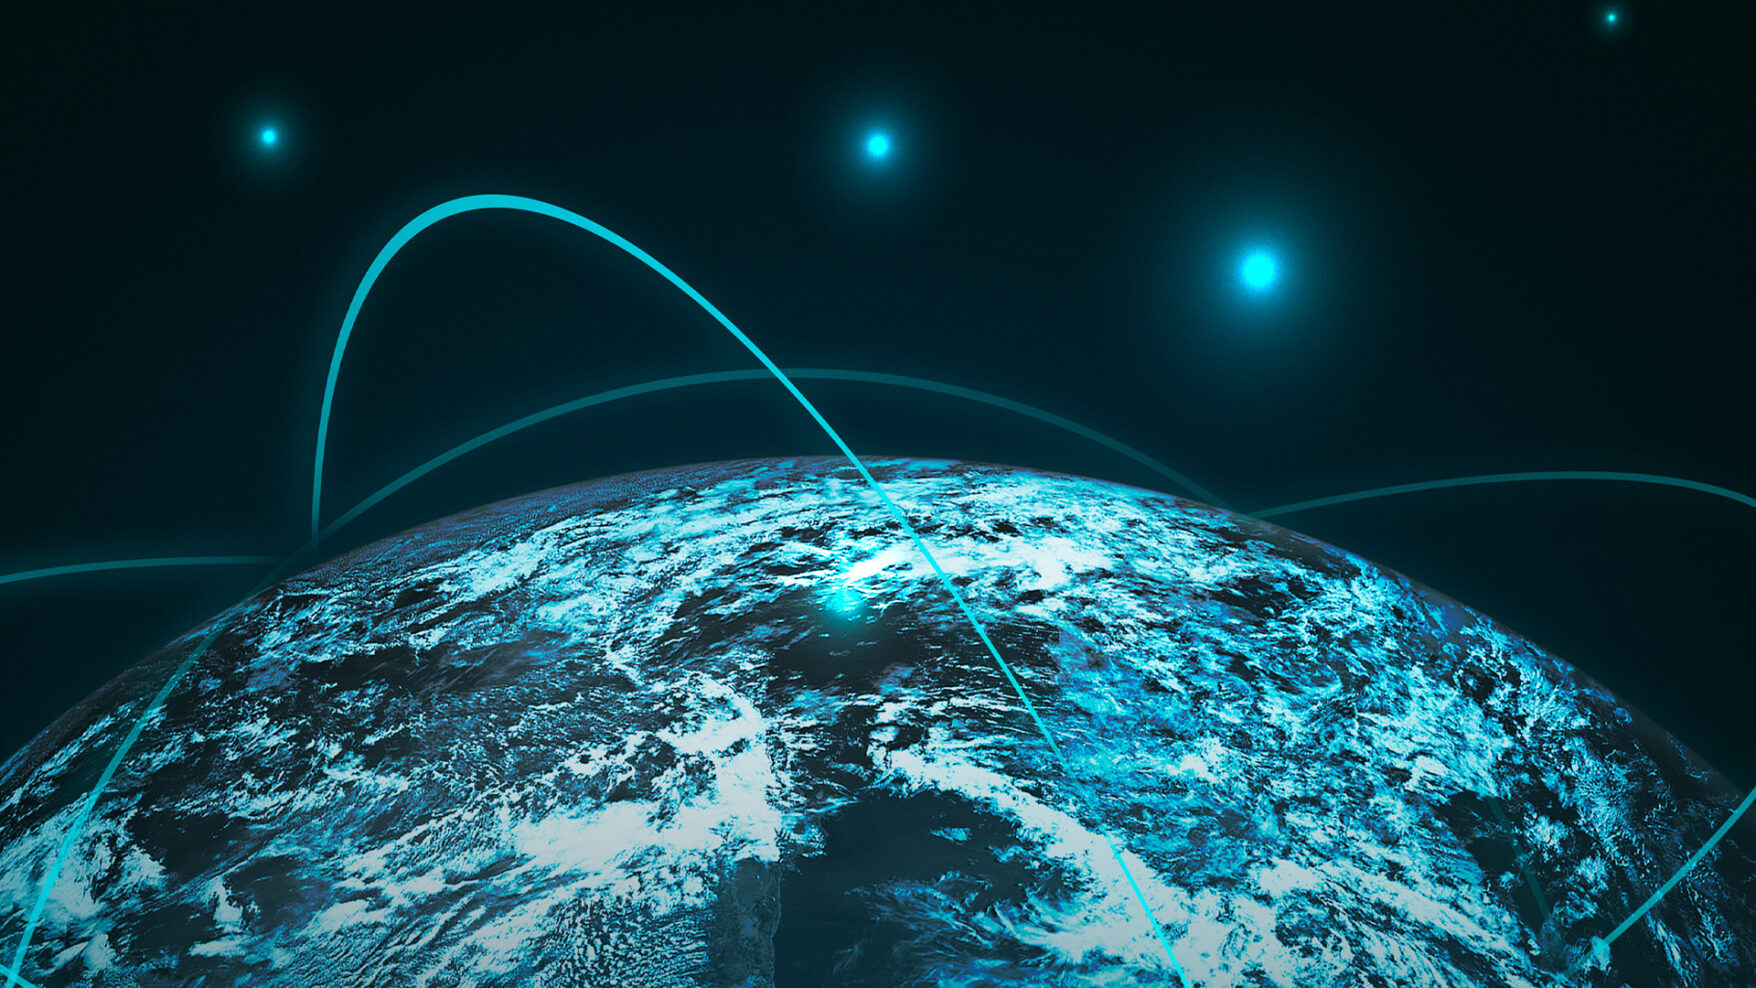 A stylized graphic of networking around the globe in shades of blue, dark teal and aqua.